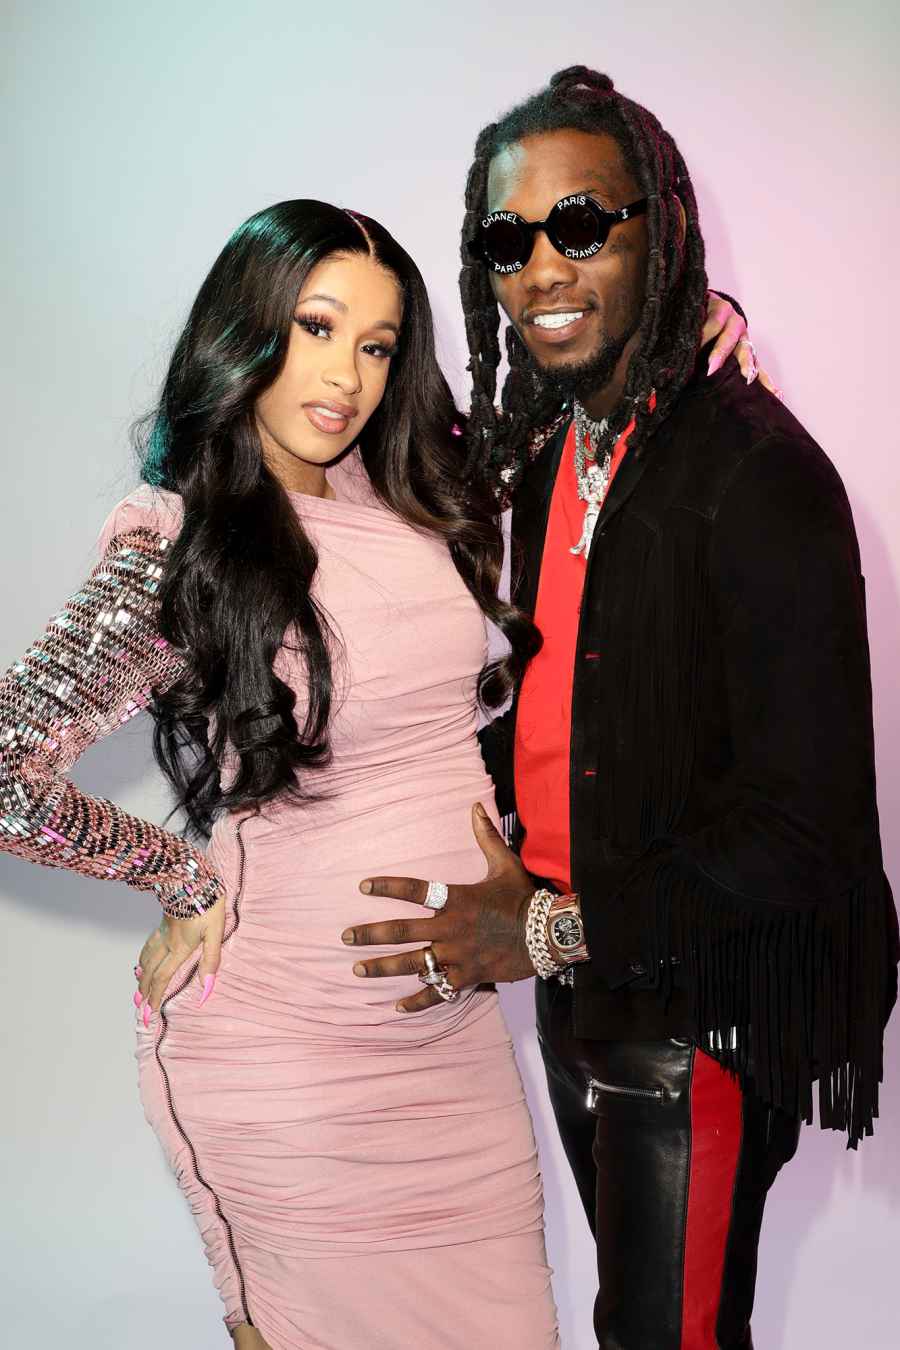 Cardi B and Offset: A Timeline of Their Relationship